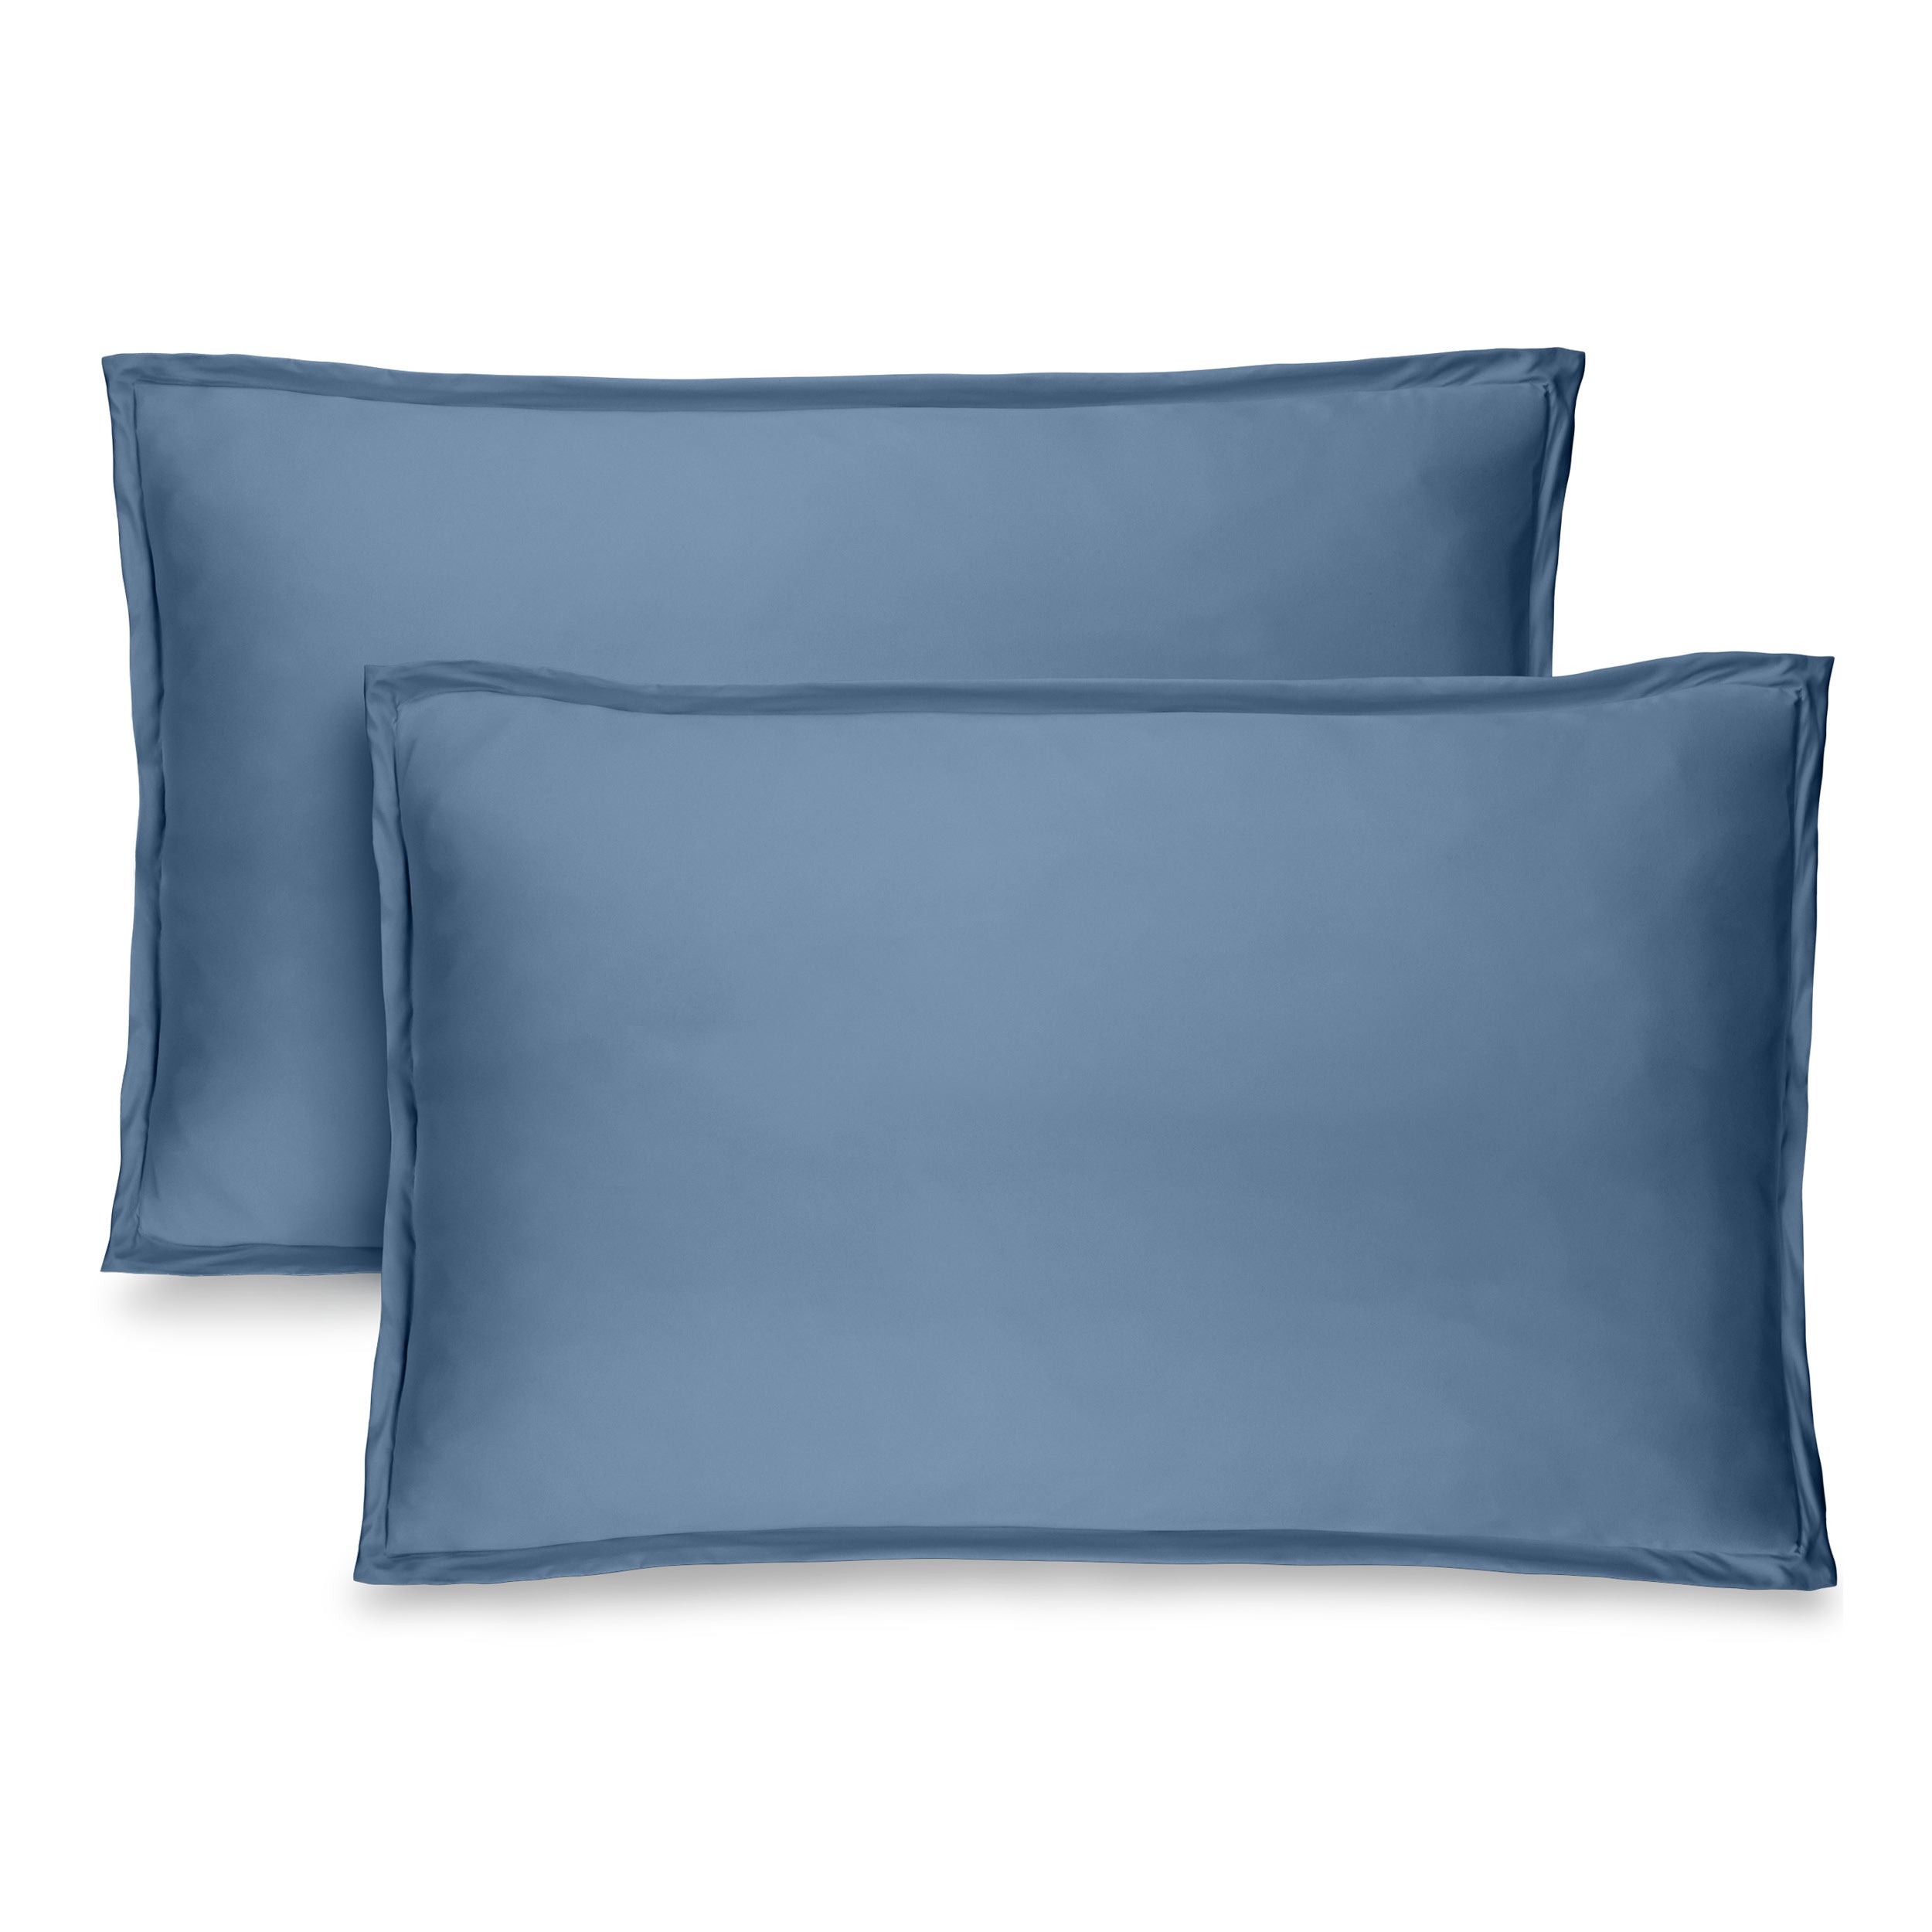 Two coronet blue pillow shams on pillows standing up with one behind the other